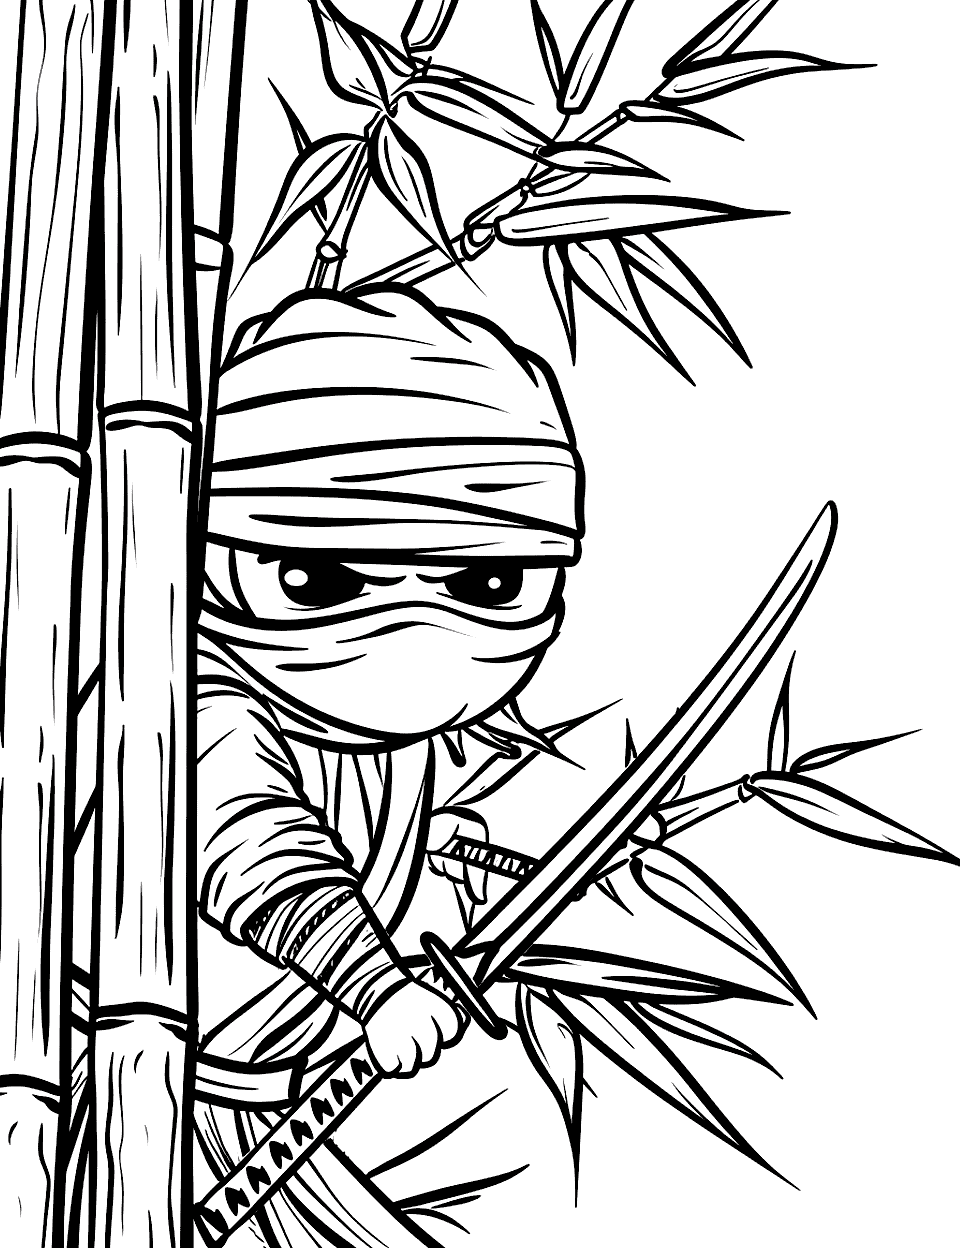 Japanese Garden Stealth Ninja Coloring Page - A ninja hiding behind a bamboo plant in a serene Japanese garden.